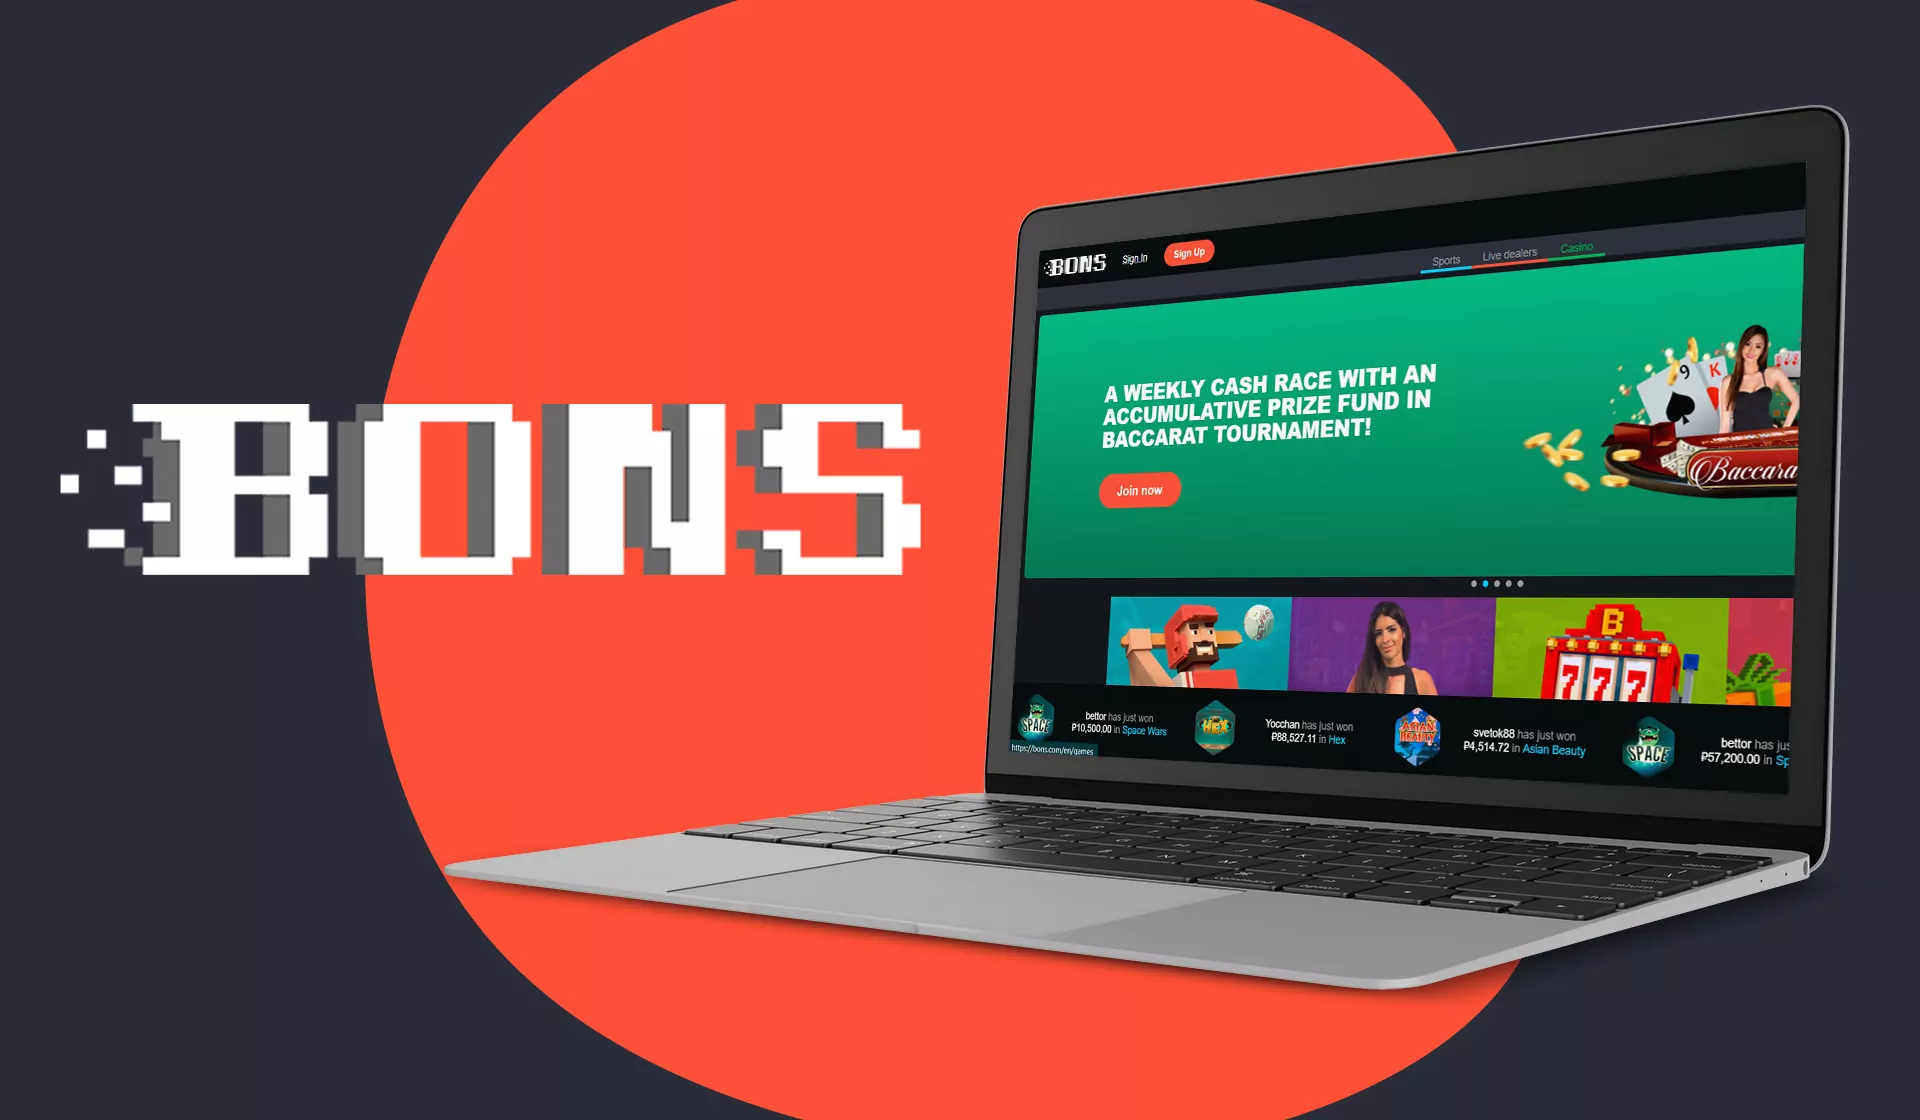 Bons is a new bookmaket in Bangladesh and offers both sports betting and casino.